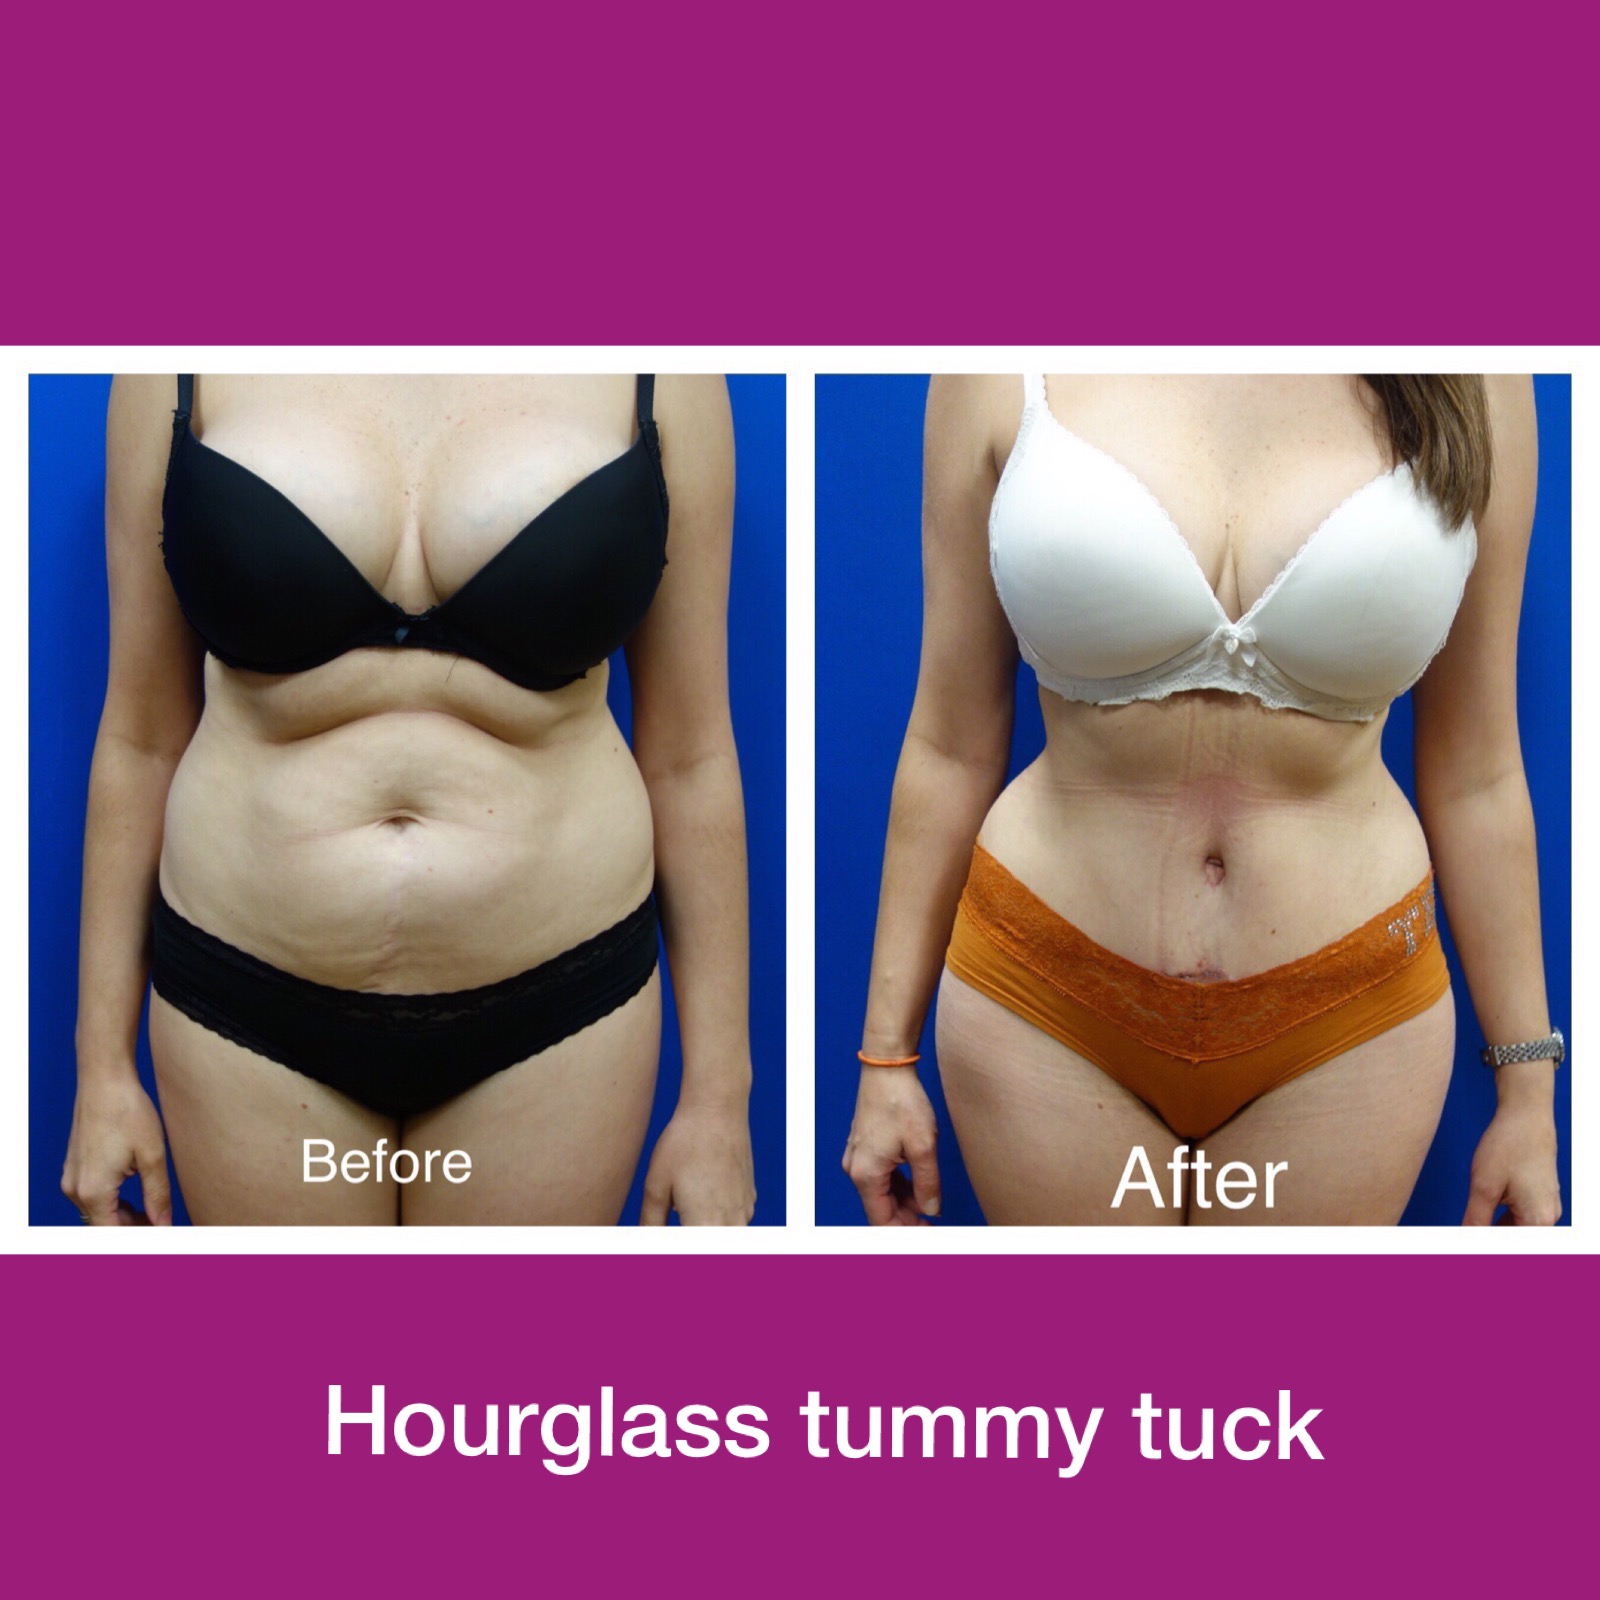 Everything You Need to Know About Hourglass Tummy Tuck